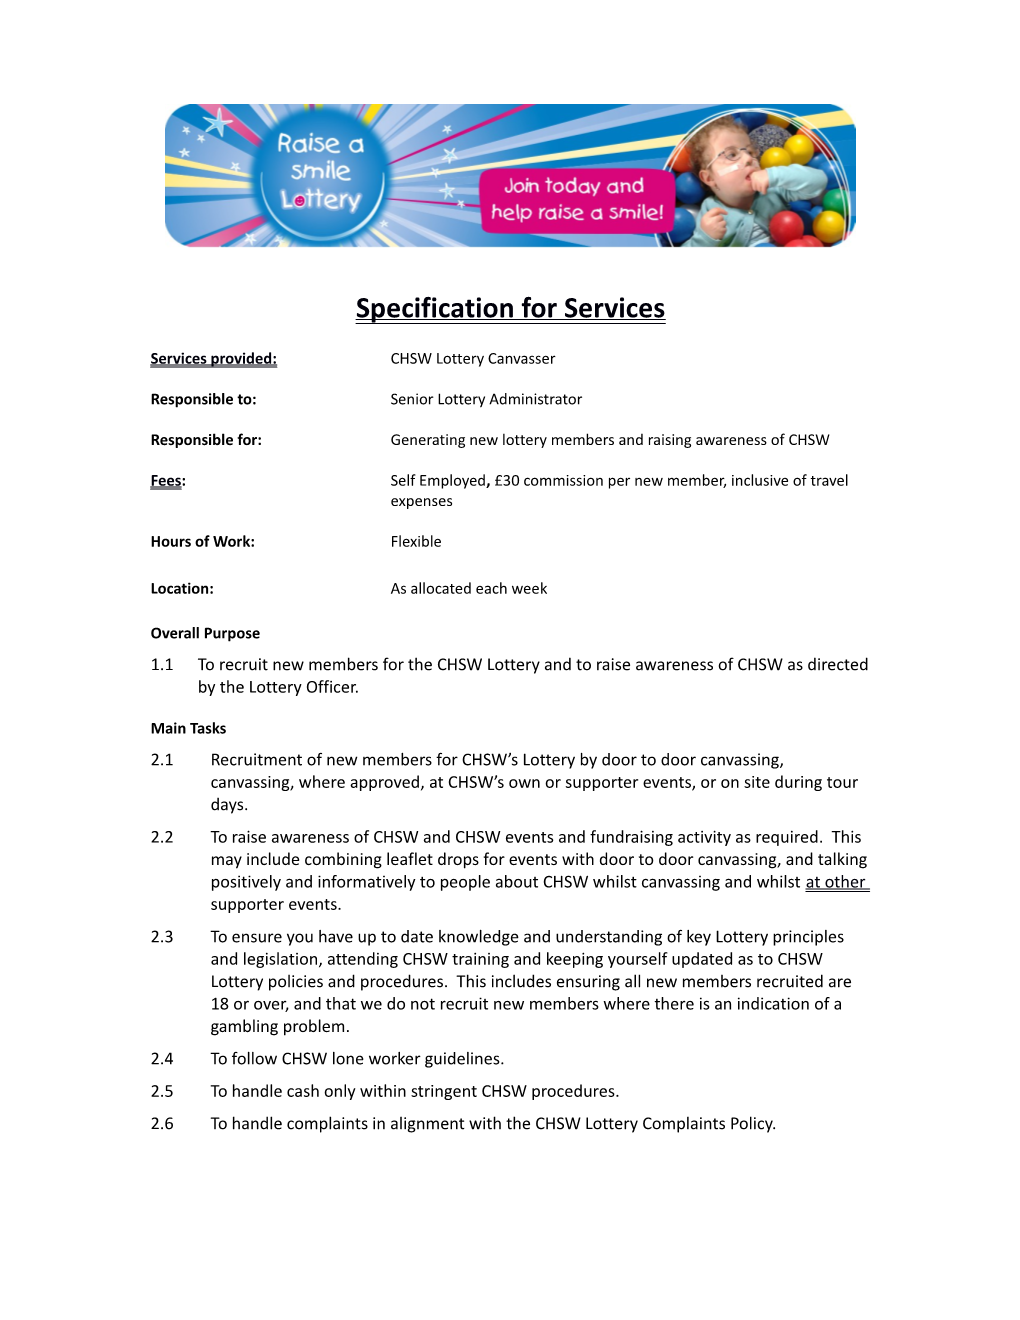 Specification for Services